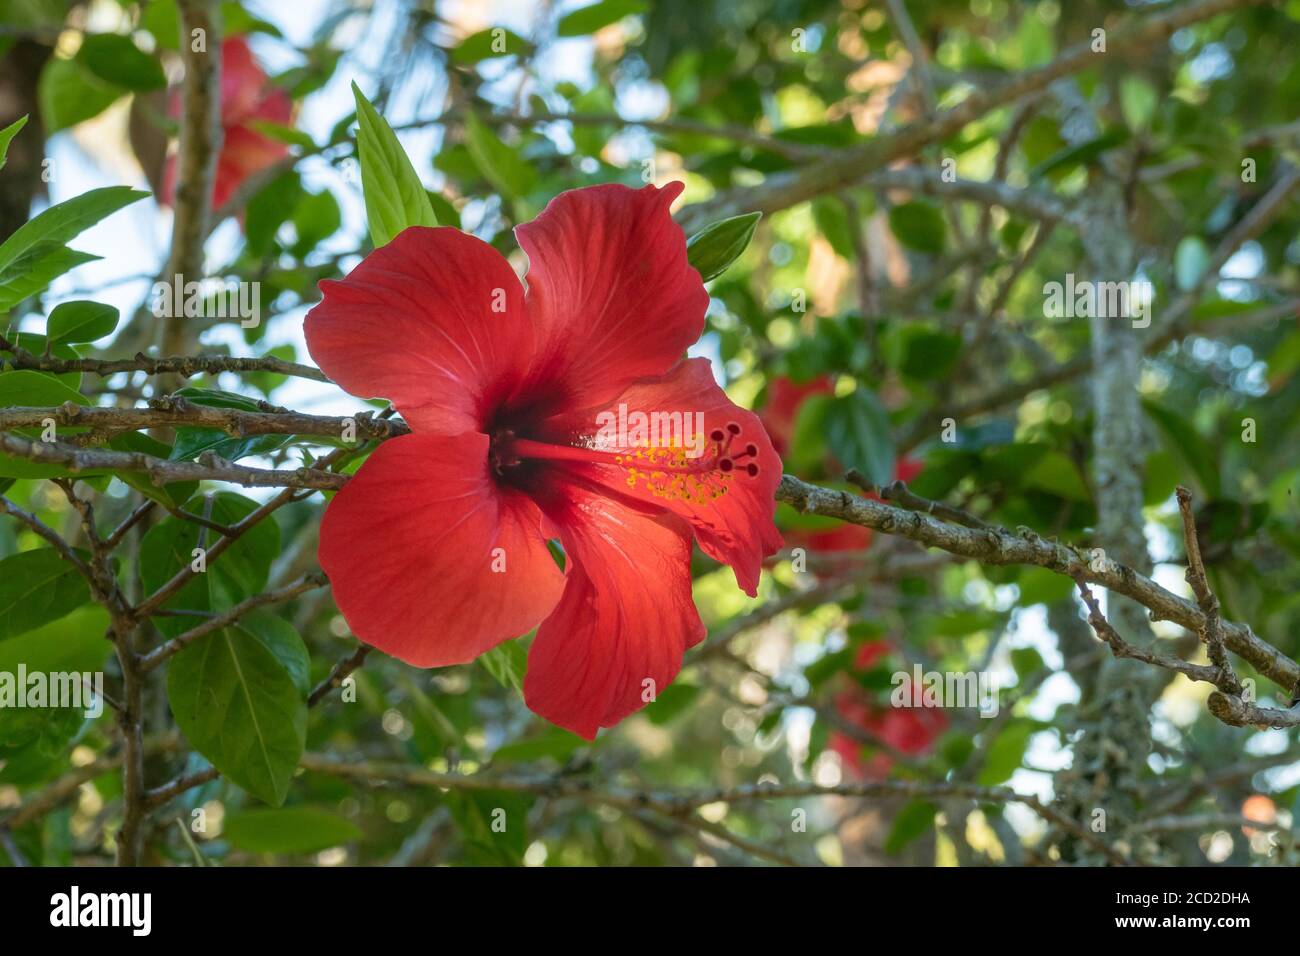 China rose flower outdoors on summer Hibiscus rosa-sinensis Stock Photo